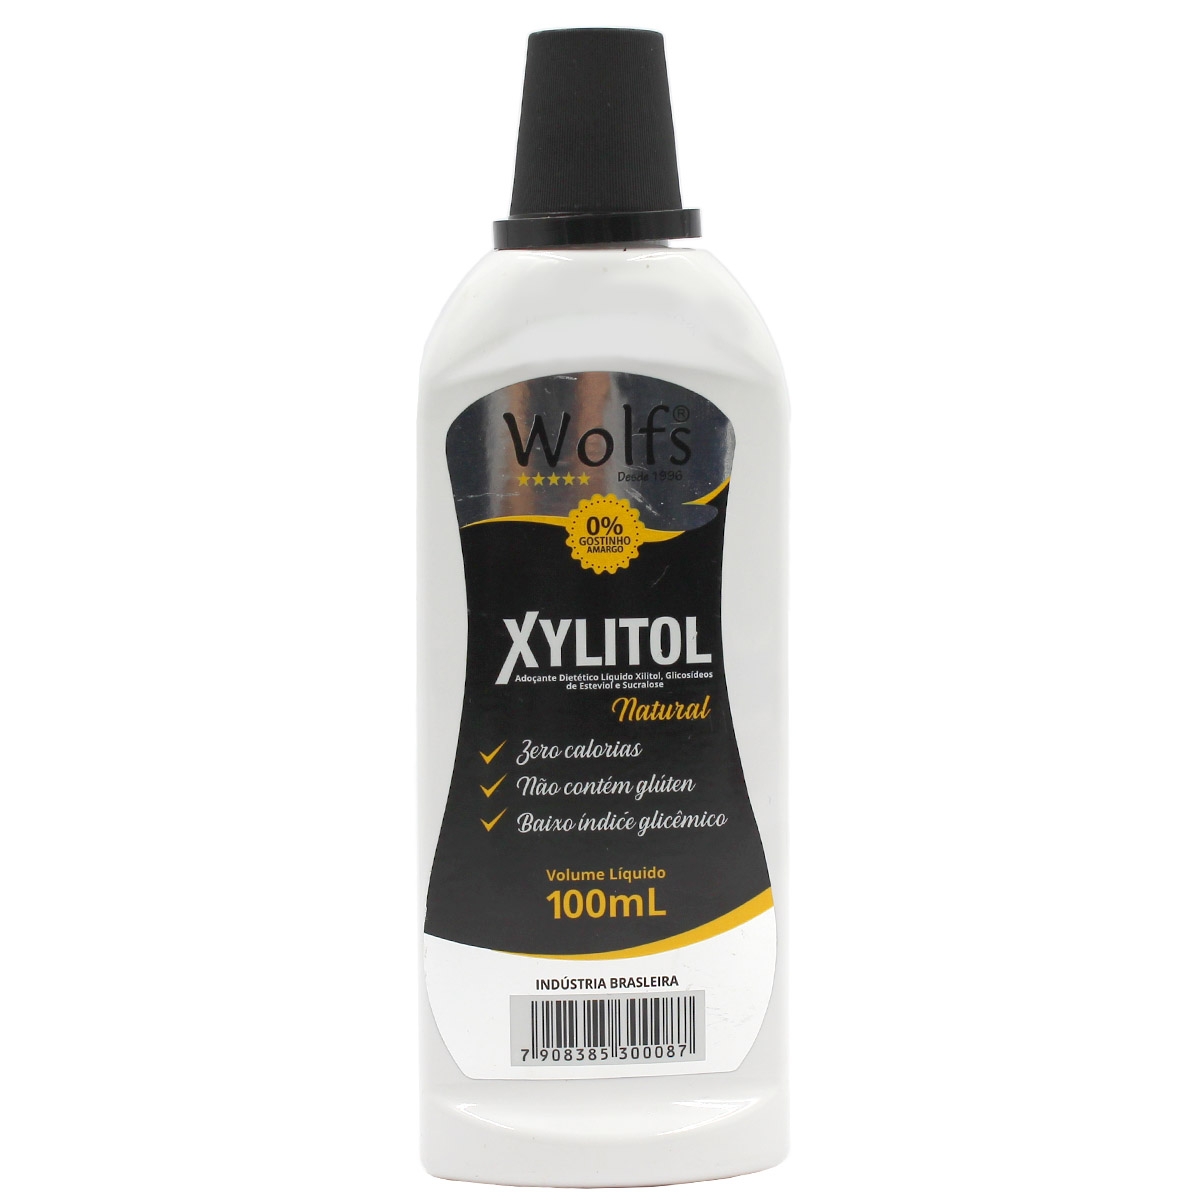 7908385300087 - ADOCANTE WOLFS XYLITOL NATURAL 100ML